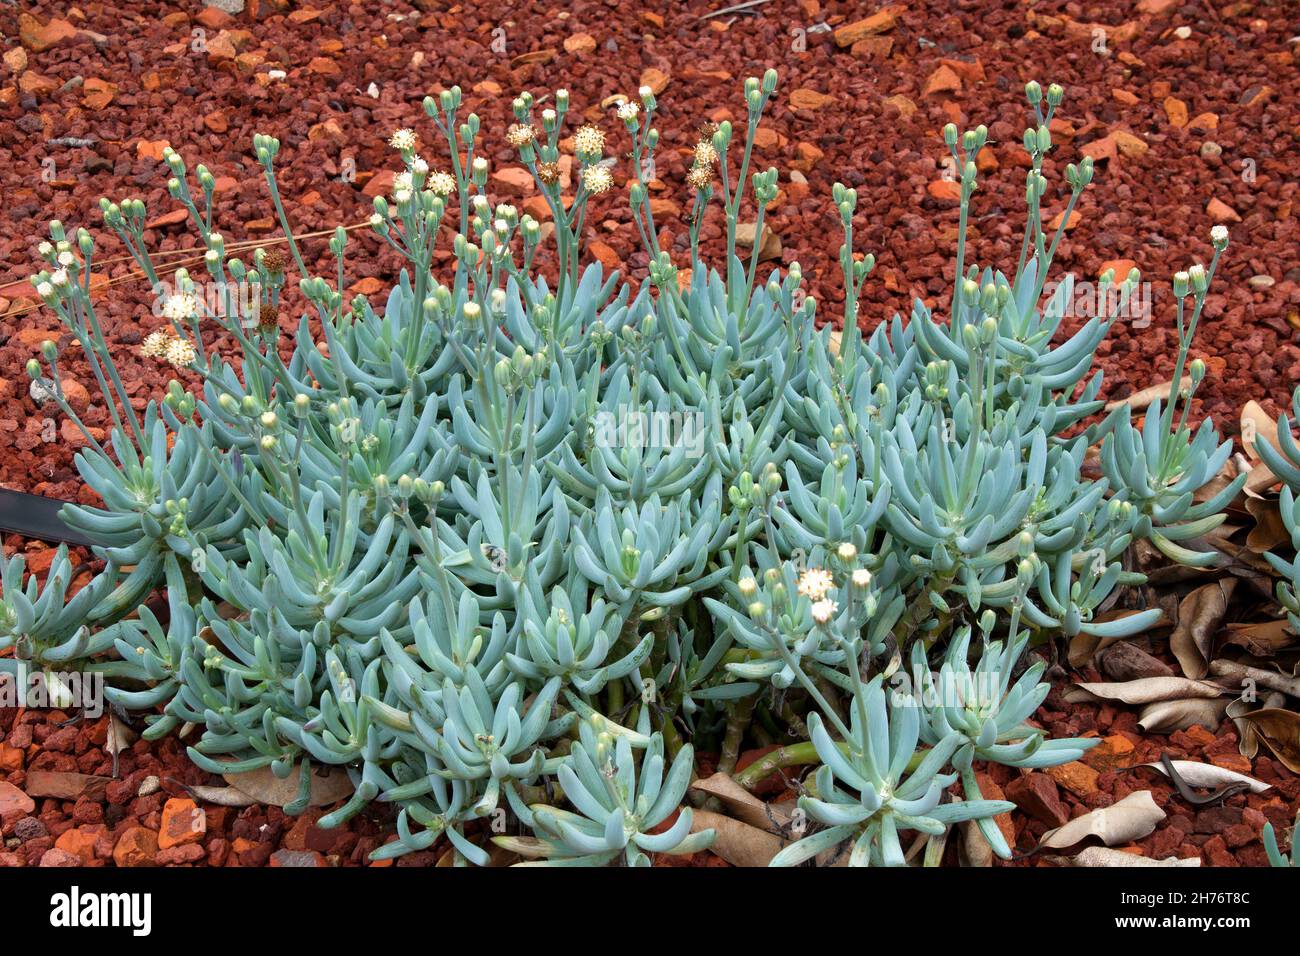 Sydney Australia, clump of curio repens also known as blue chalksticks ground cover Stock Photo